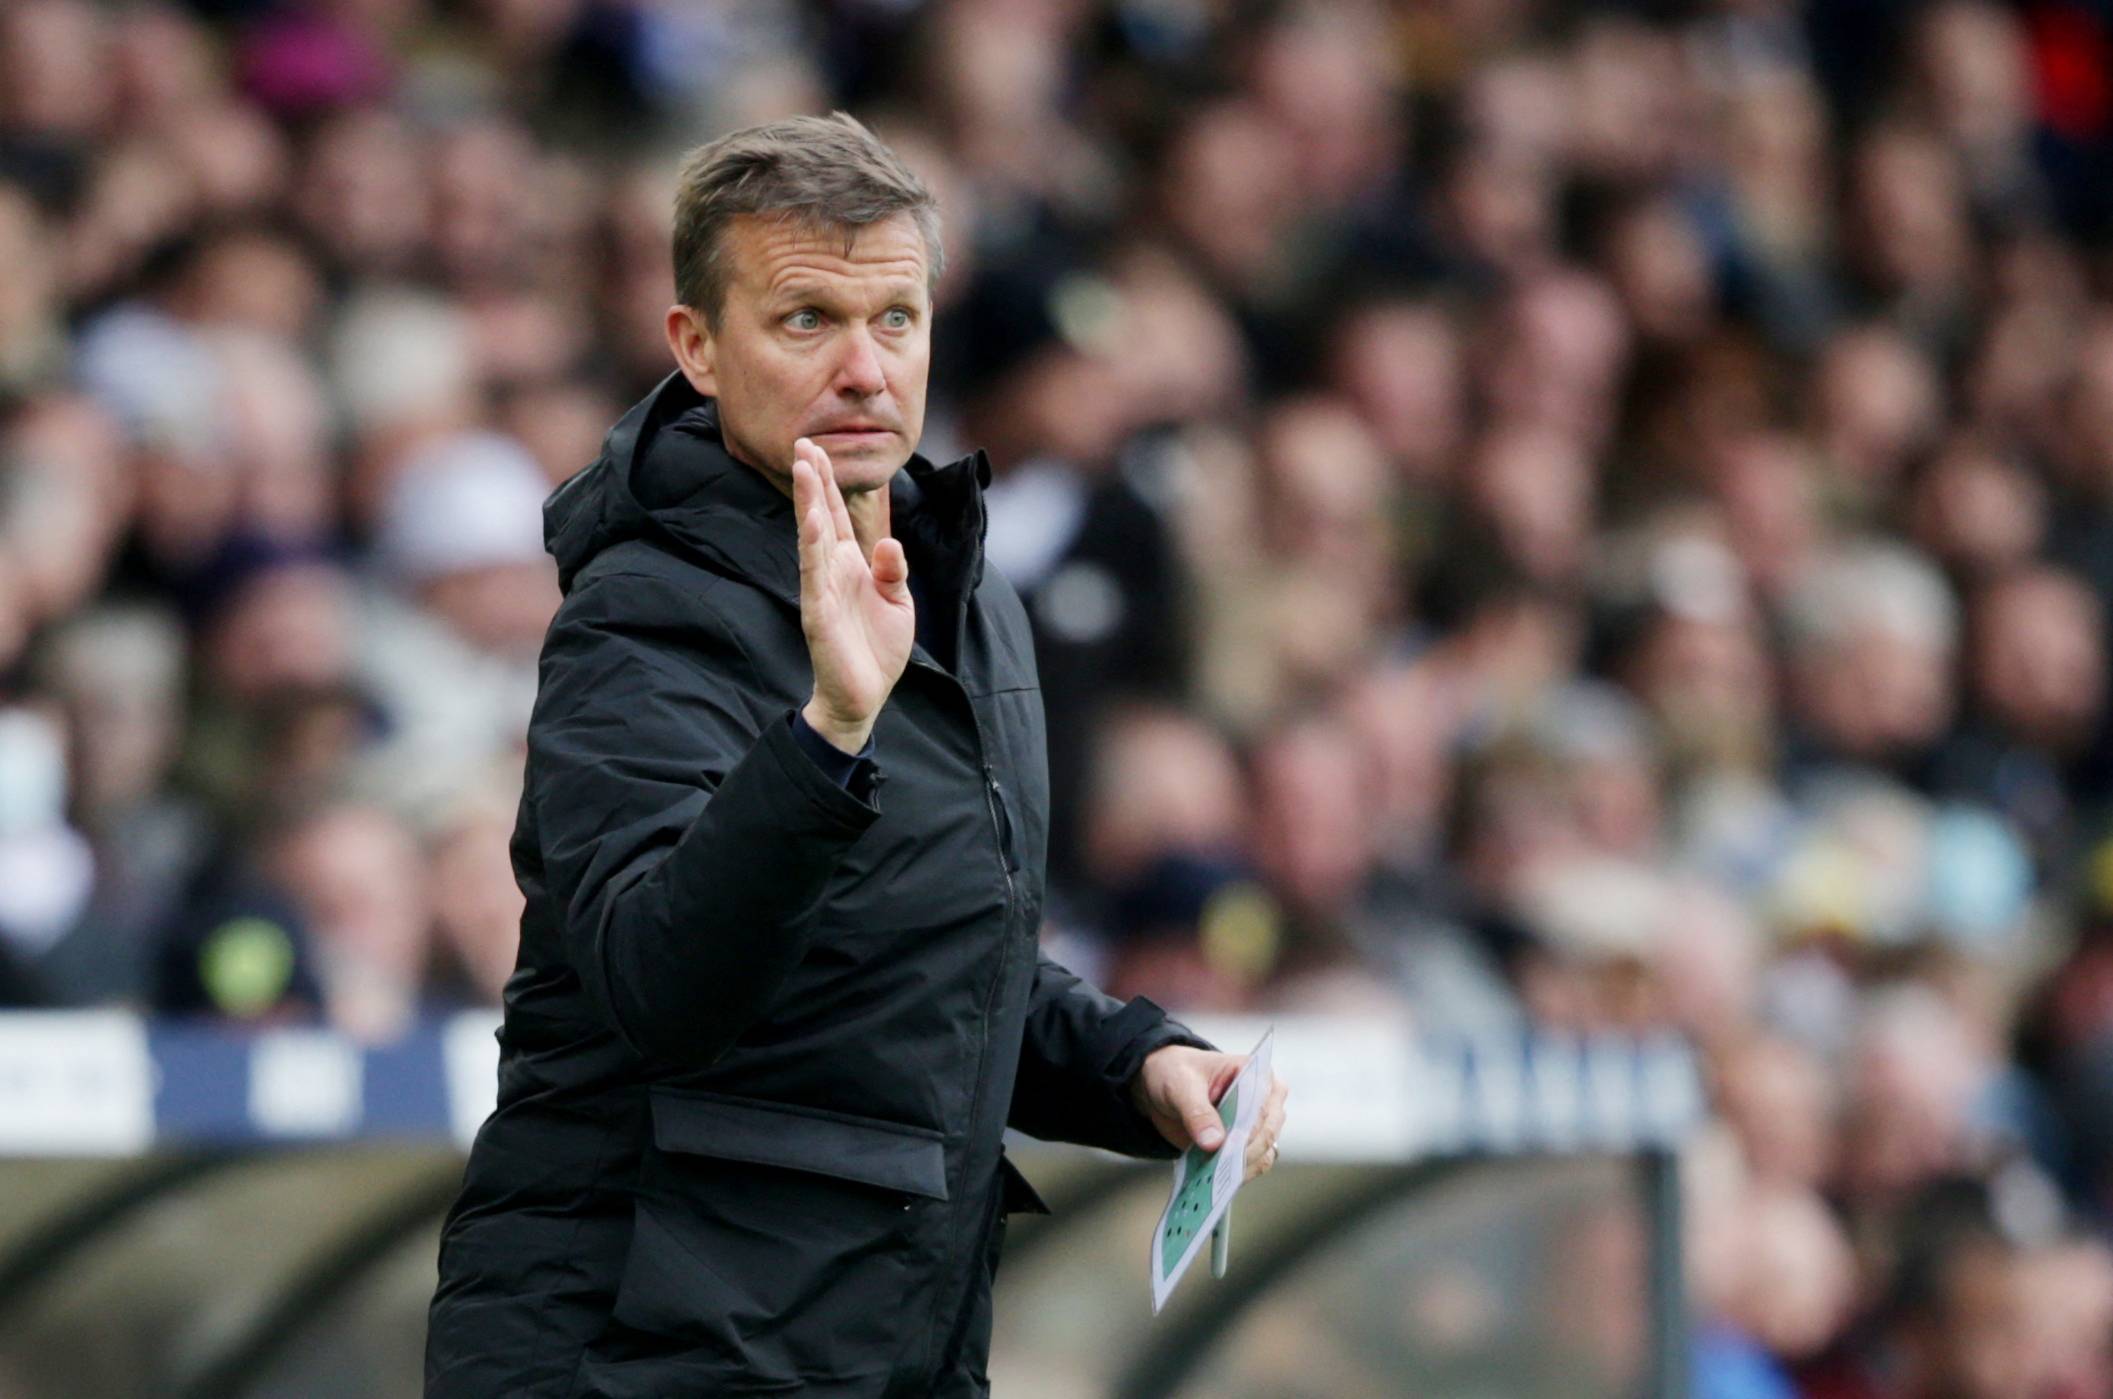 Leeds United manager Jesse Marsch during Southampton clash